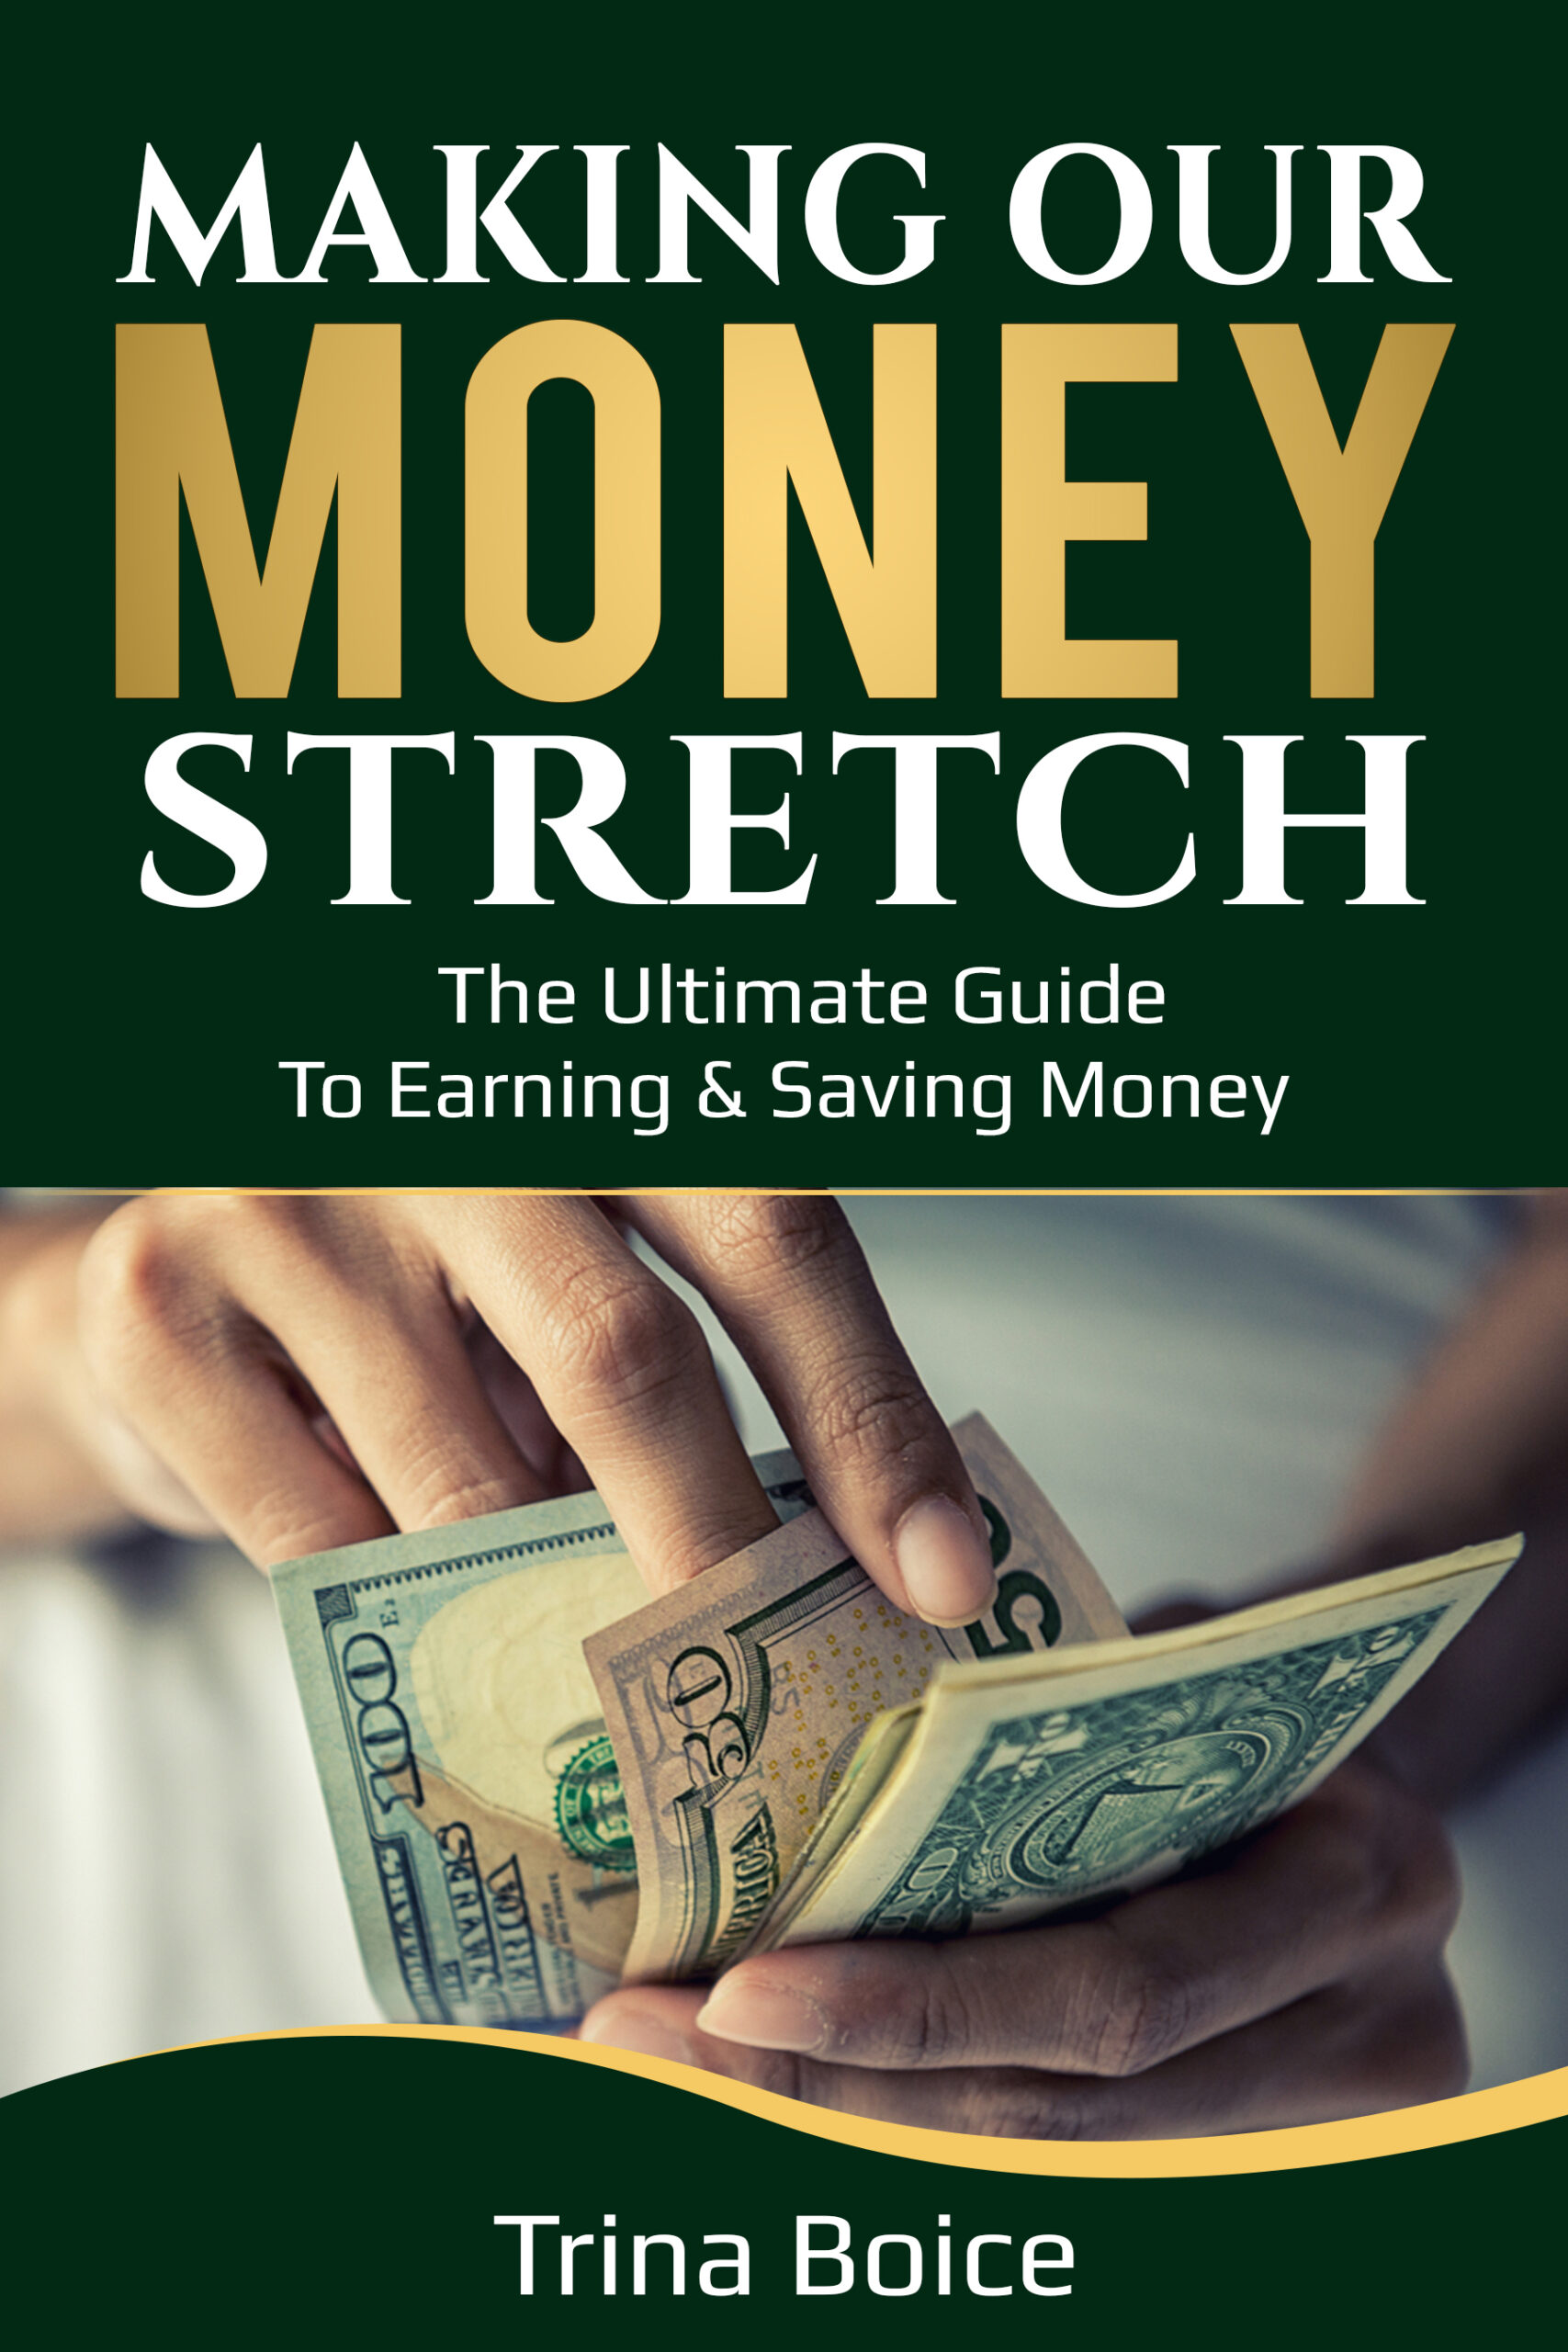 FREE: Making Our Money Stretch: The Ultimate Guide to Earning & Saving Money by Dr. Trina Boice